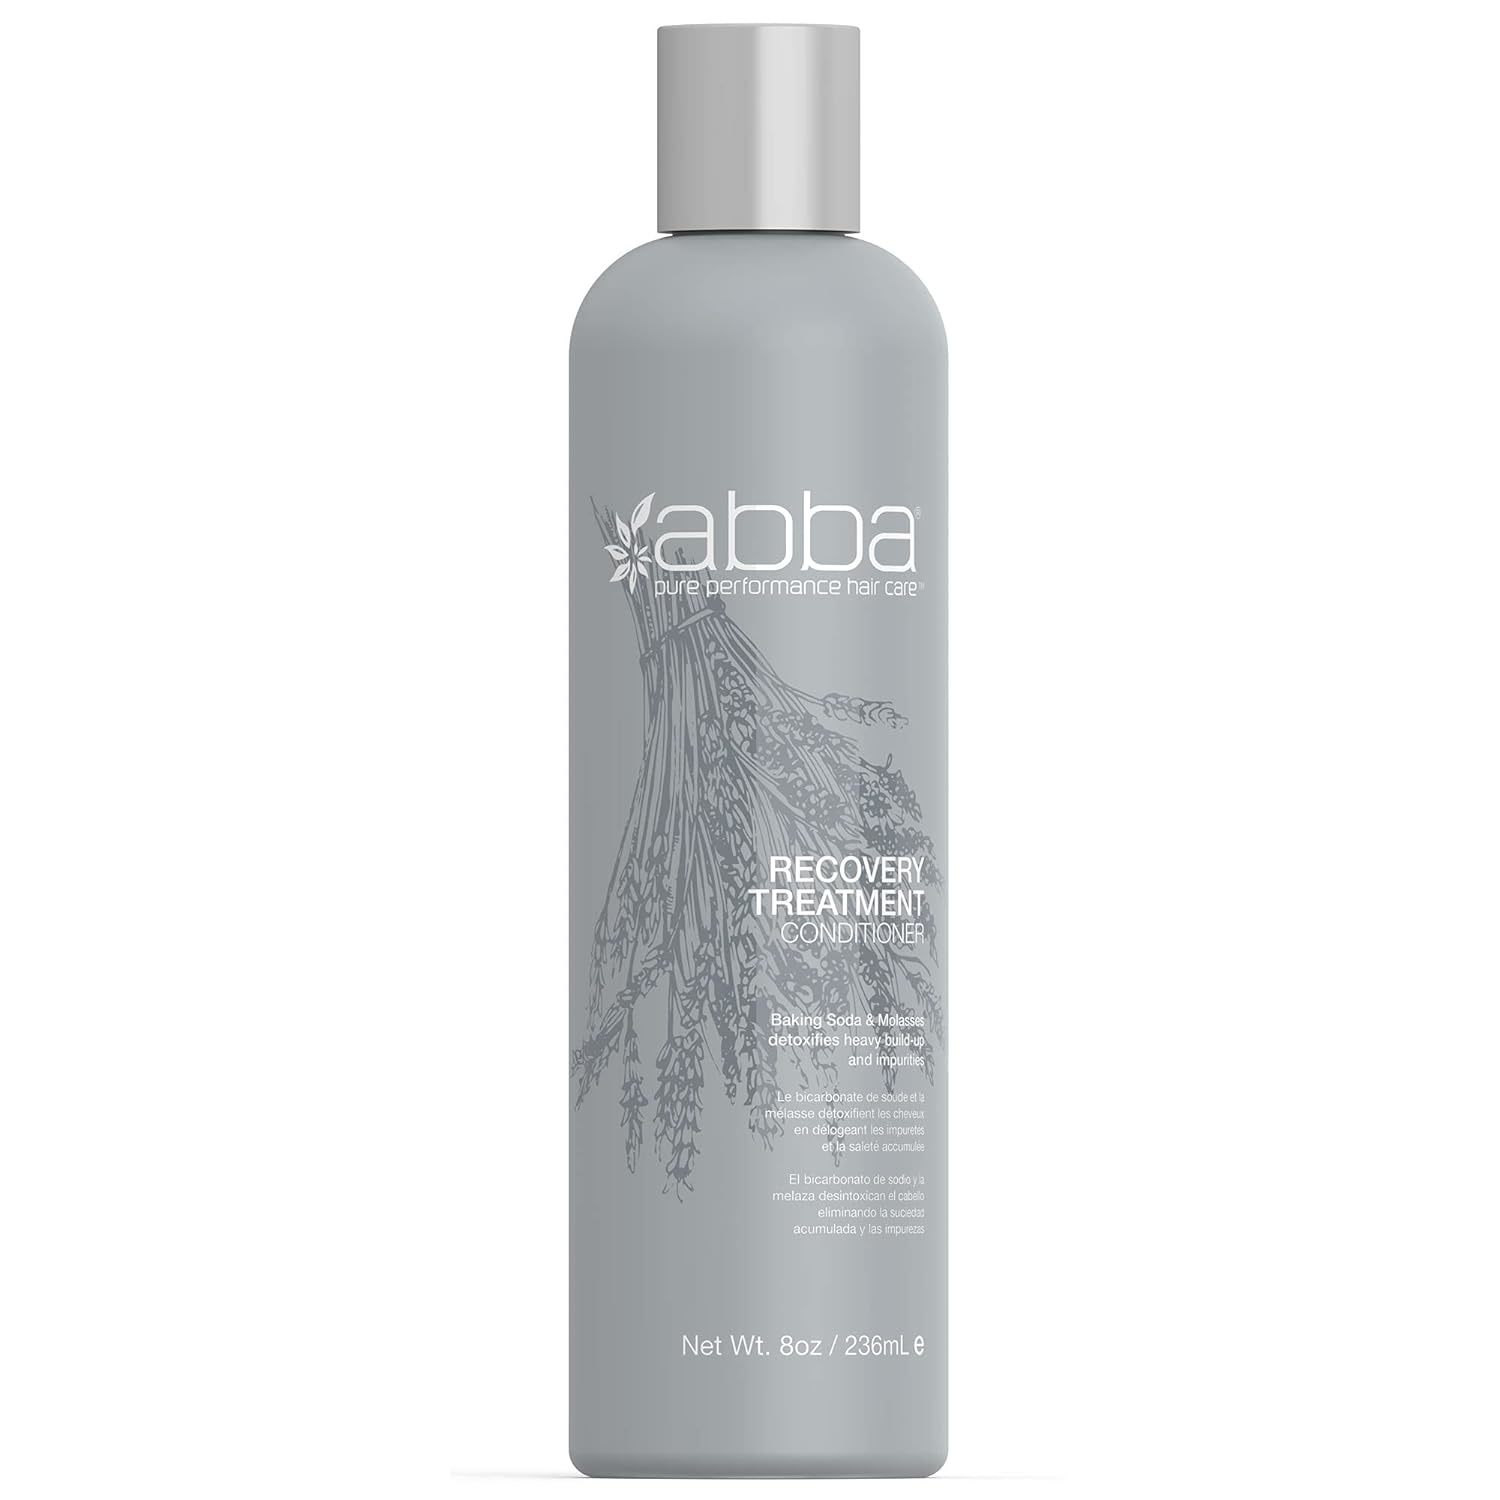 ABBA Recovery Treatment Conditioner, Lavender & Peppermint Oil, 8 Oz. - $21.00